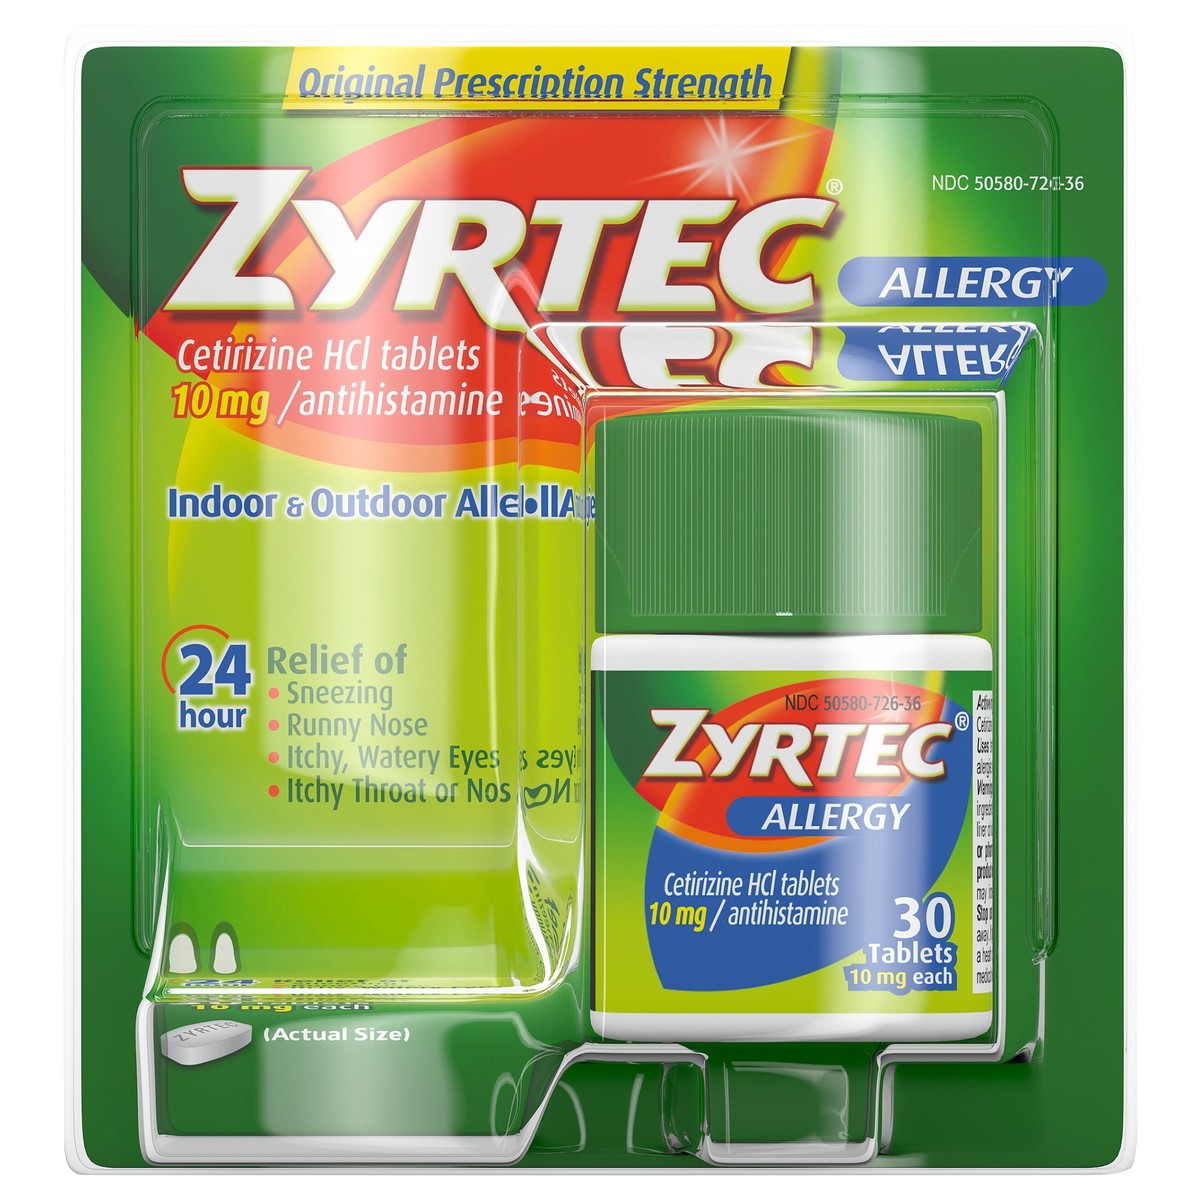 slide 1 of 7, Zyrtec 24 Hour Allergy Relief Tablets, Indoor & Outdoor Allergy Medicine with 10 mg Cetirizine HCl per Antihistamine Tablet, Relief from Runny Nose, Sneezing, Itchy Eyes & More, 30 ct, 30 ct